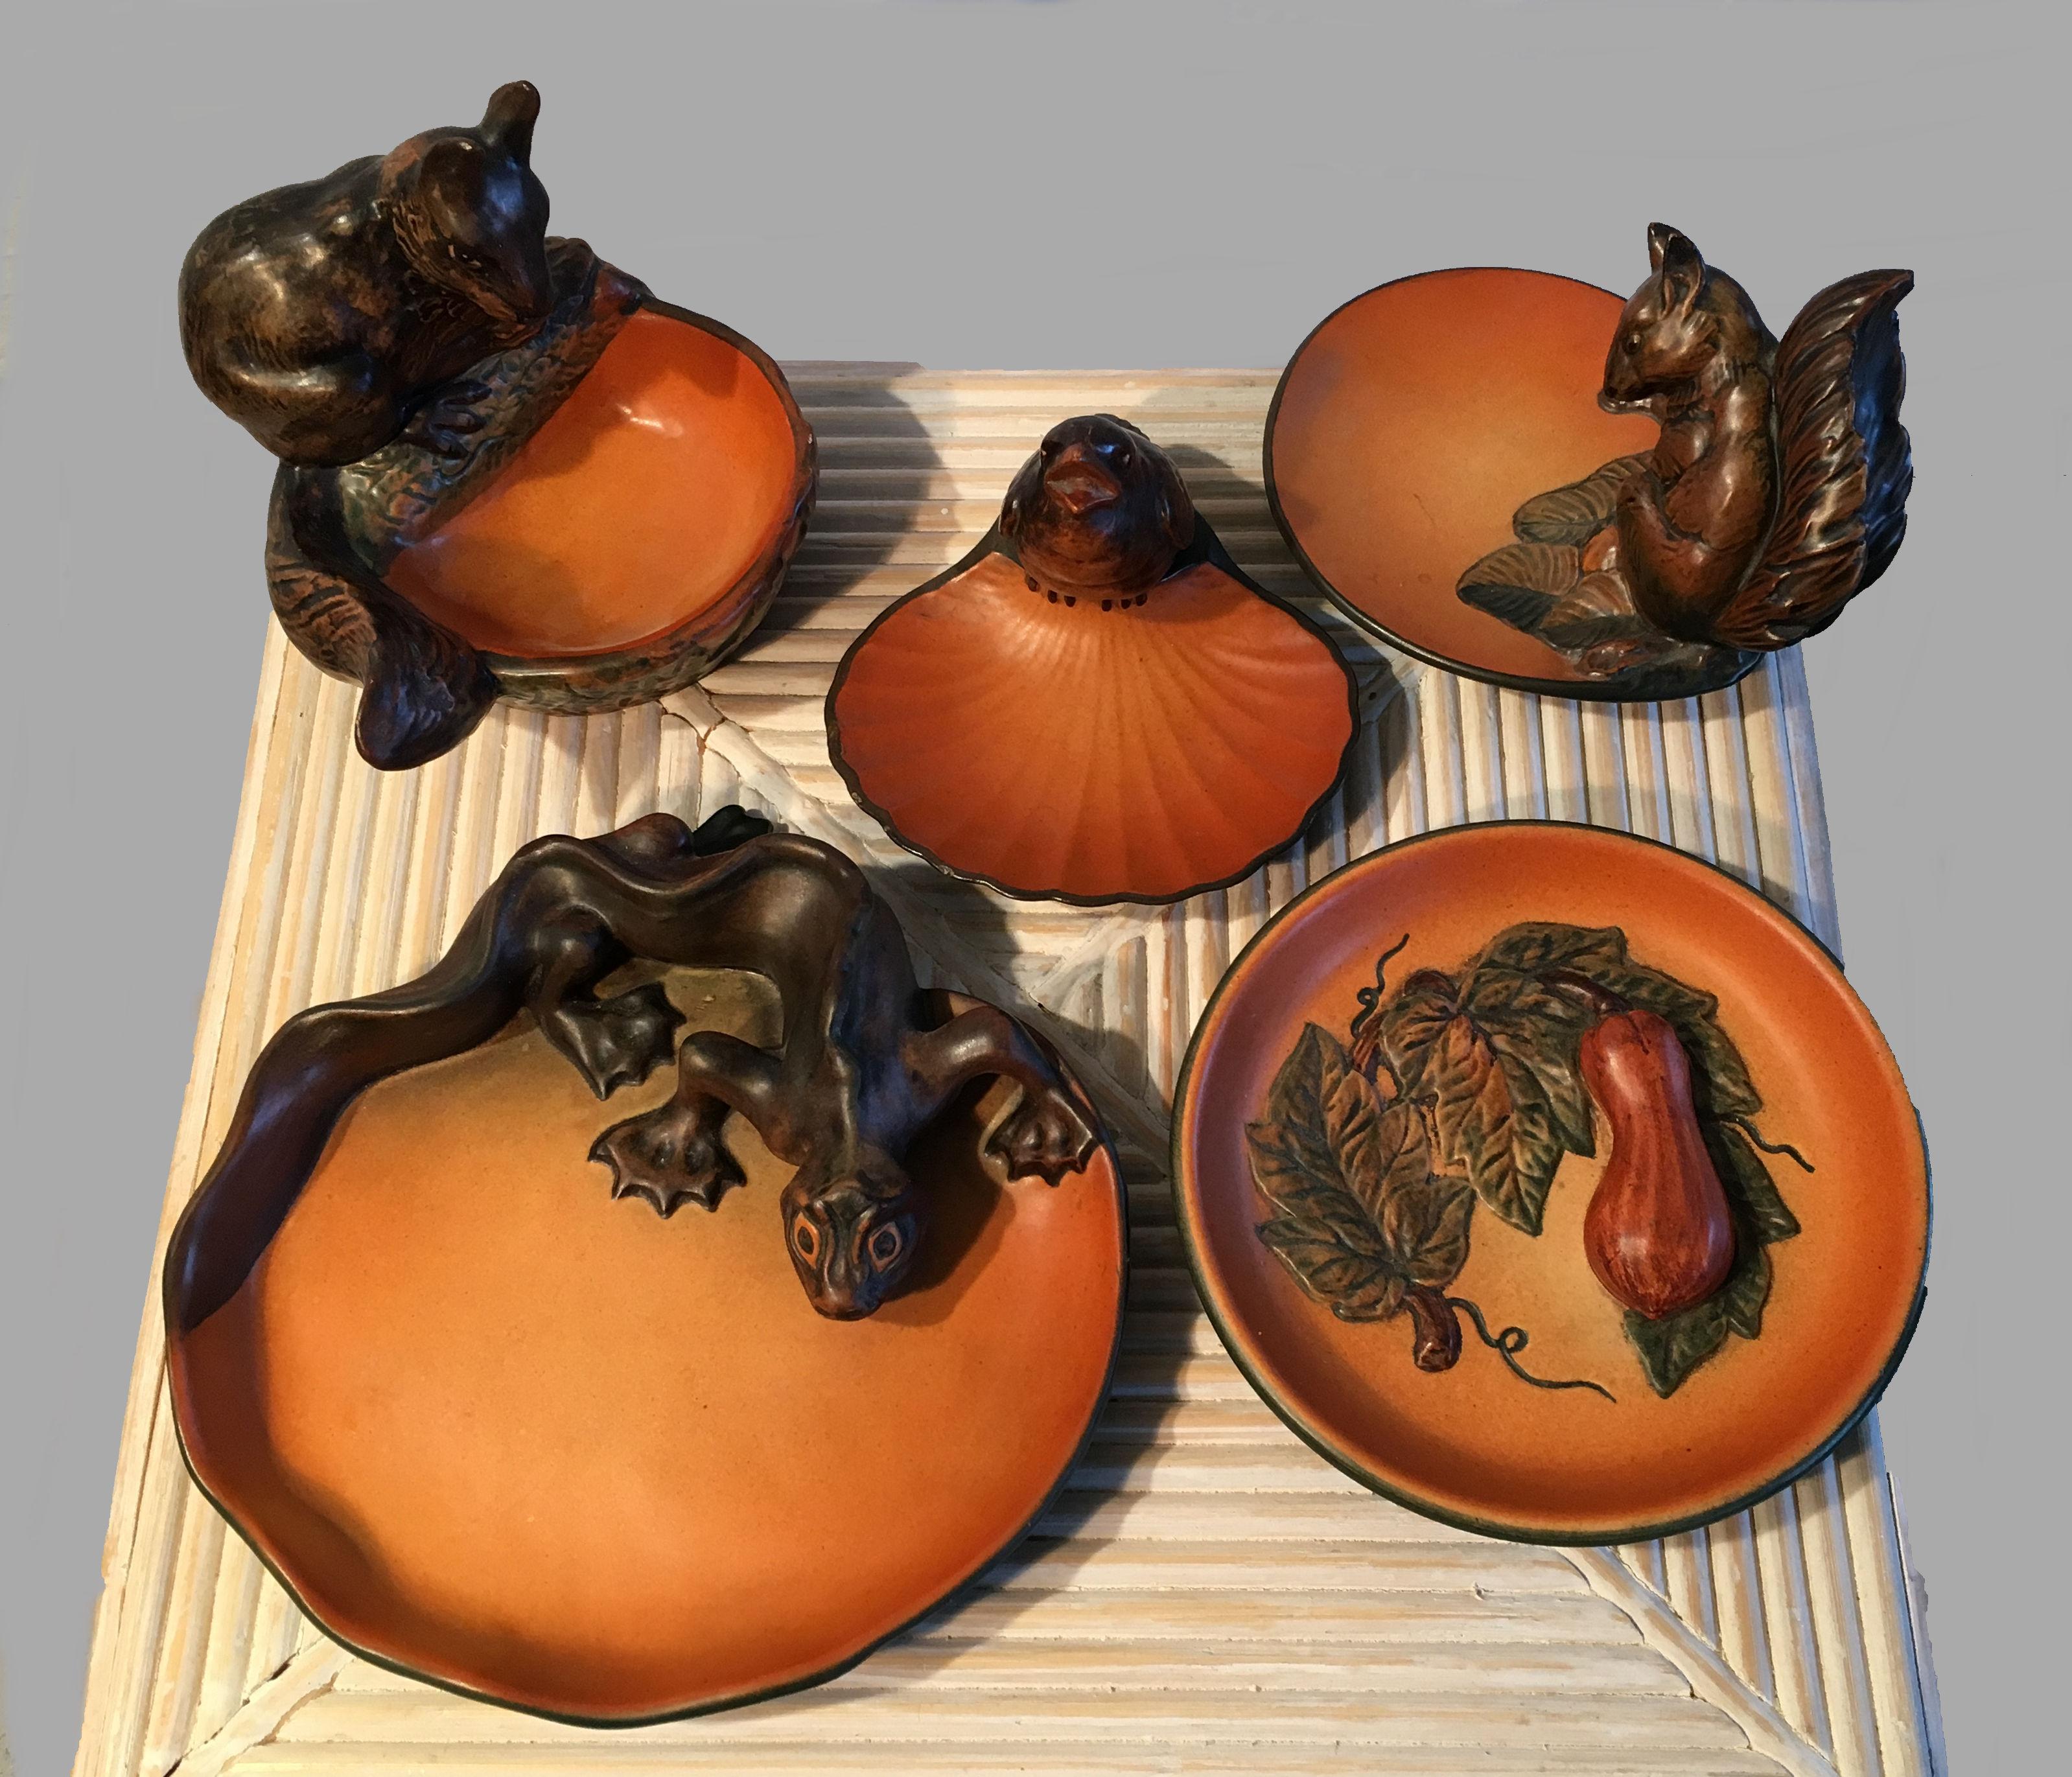 1930s set of five Danish Art Nouveau bowls by P. Ibsens Enke.

Set of five small decorative bowls in excellent condition with animal / fruit decorations designed circa 1905 by the famous Danish artist Thorvald Bindesbøll.

Thorvald Bindesbøll